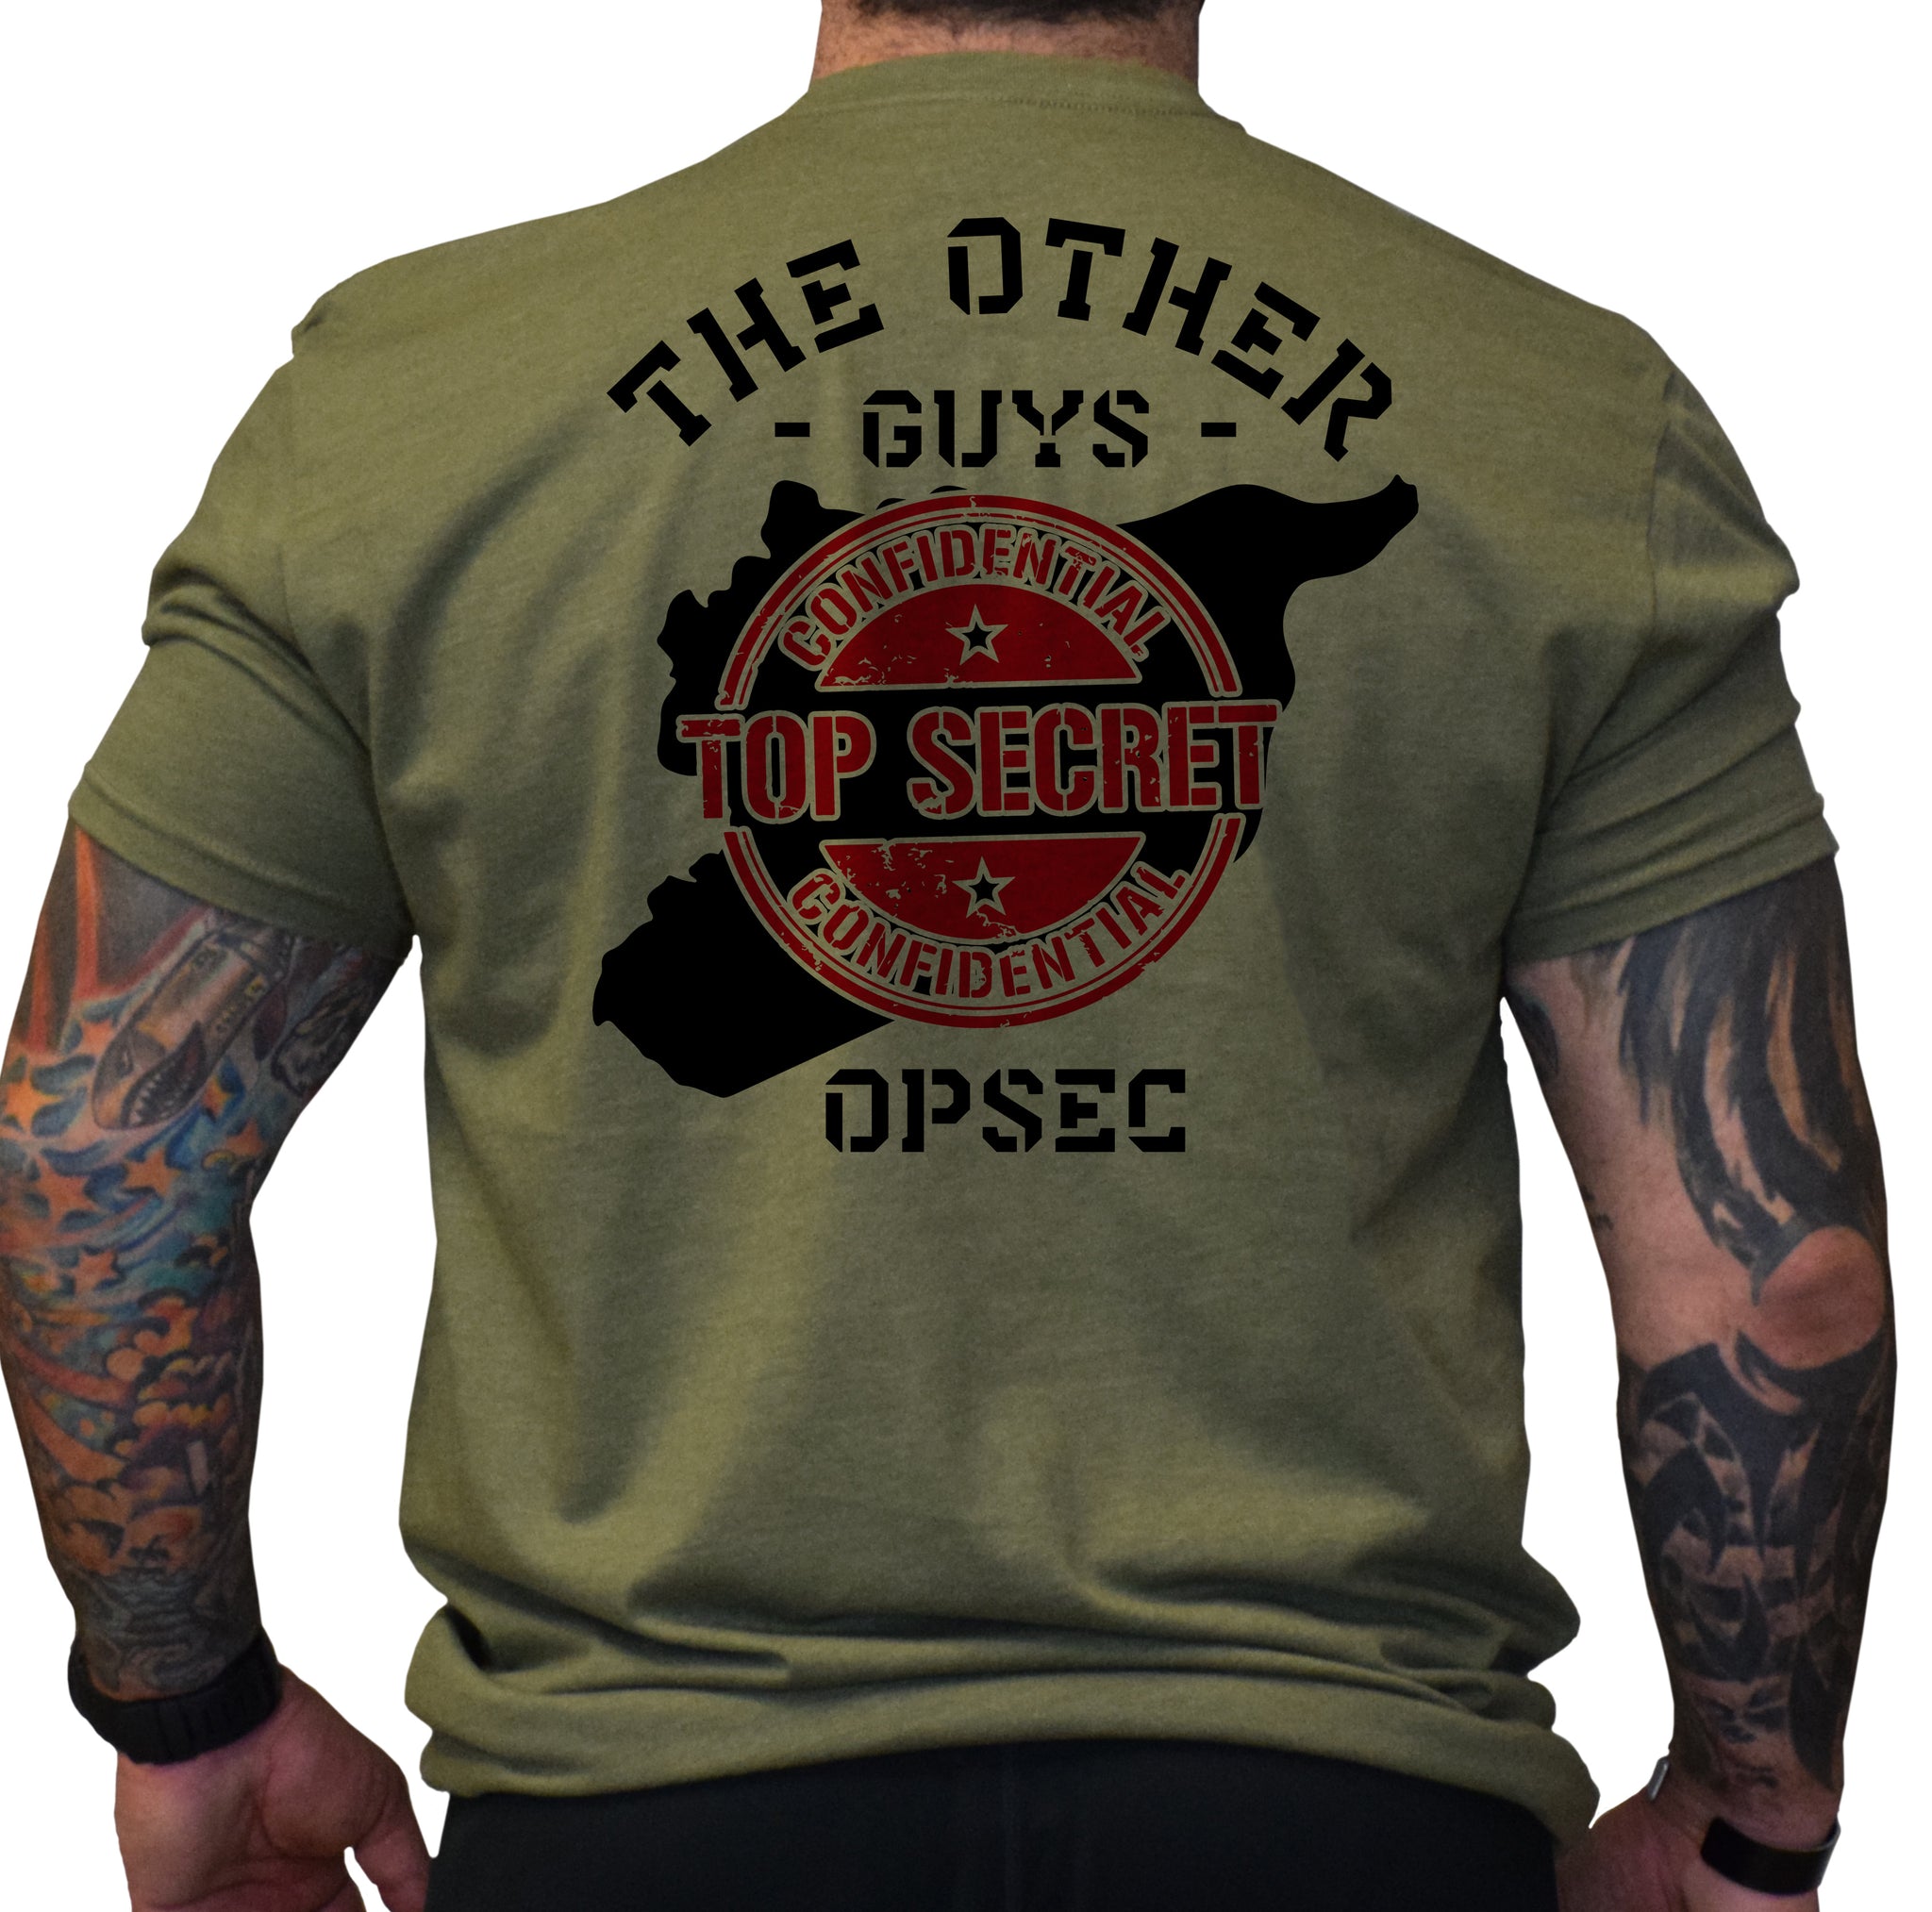 The Other Guys Tumbler - American Trigger Pullers